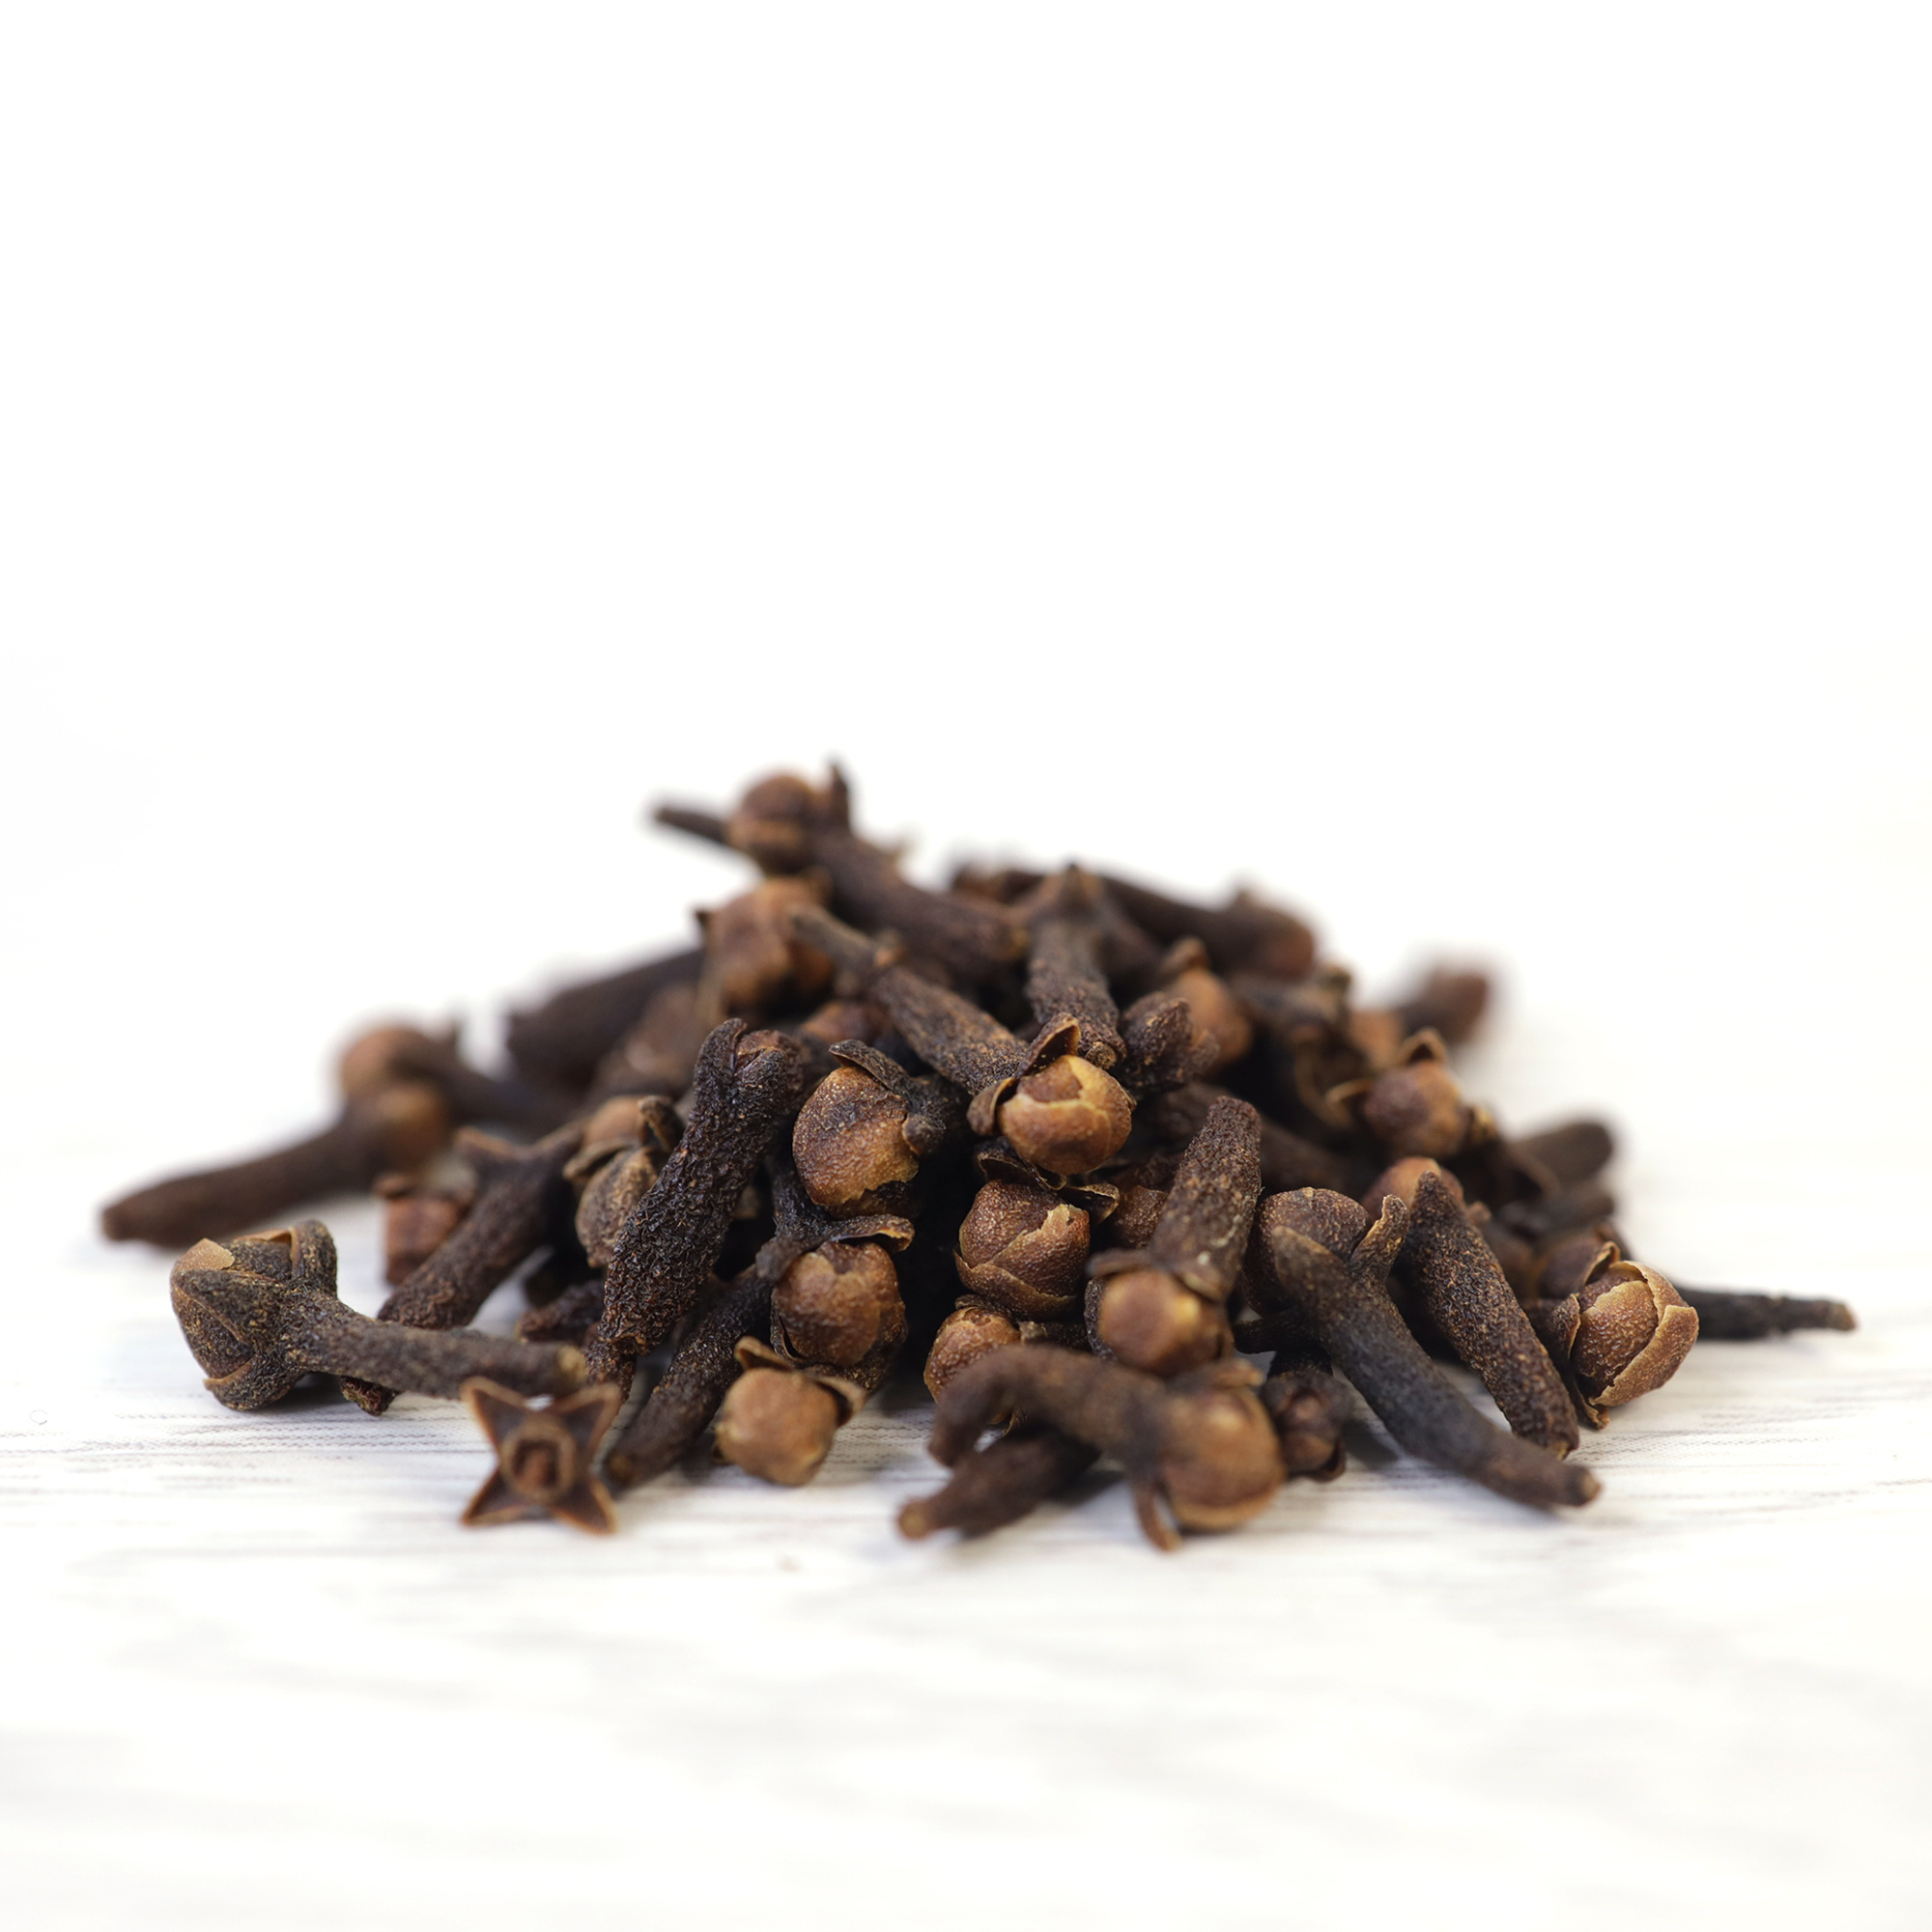 Chinese clove sticks, Ground cloves, Spice purchase, Authentic product, 2000x2000 HD Handy